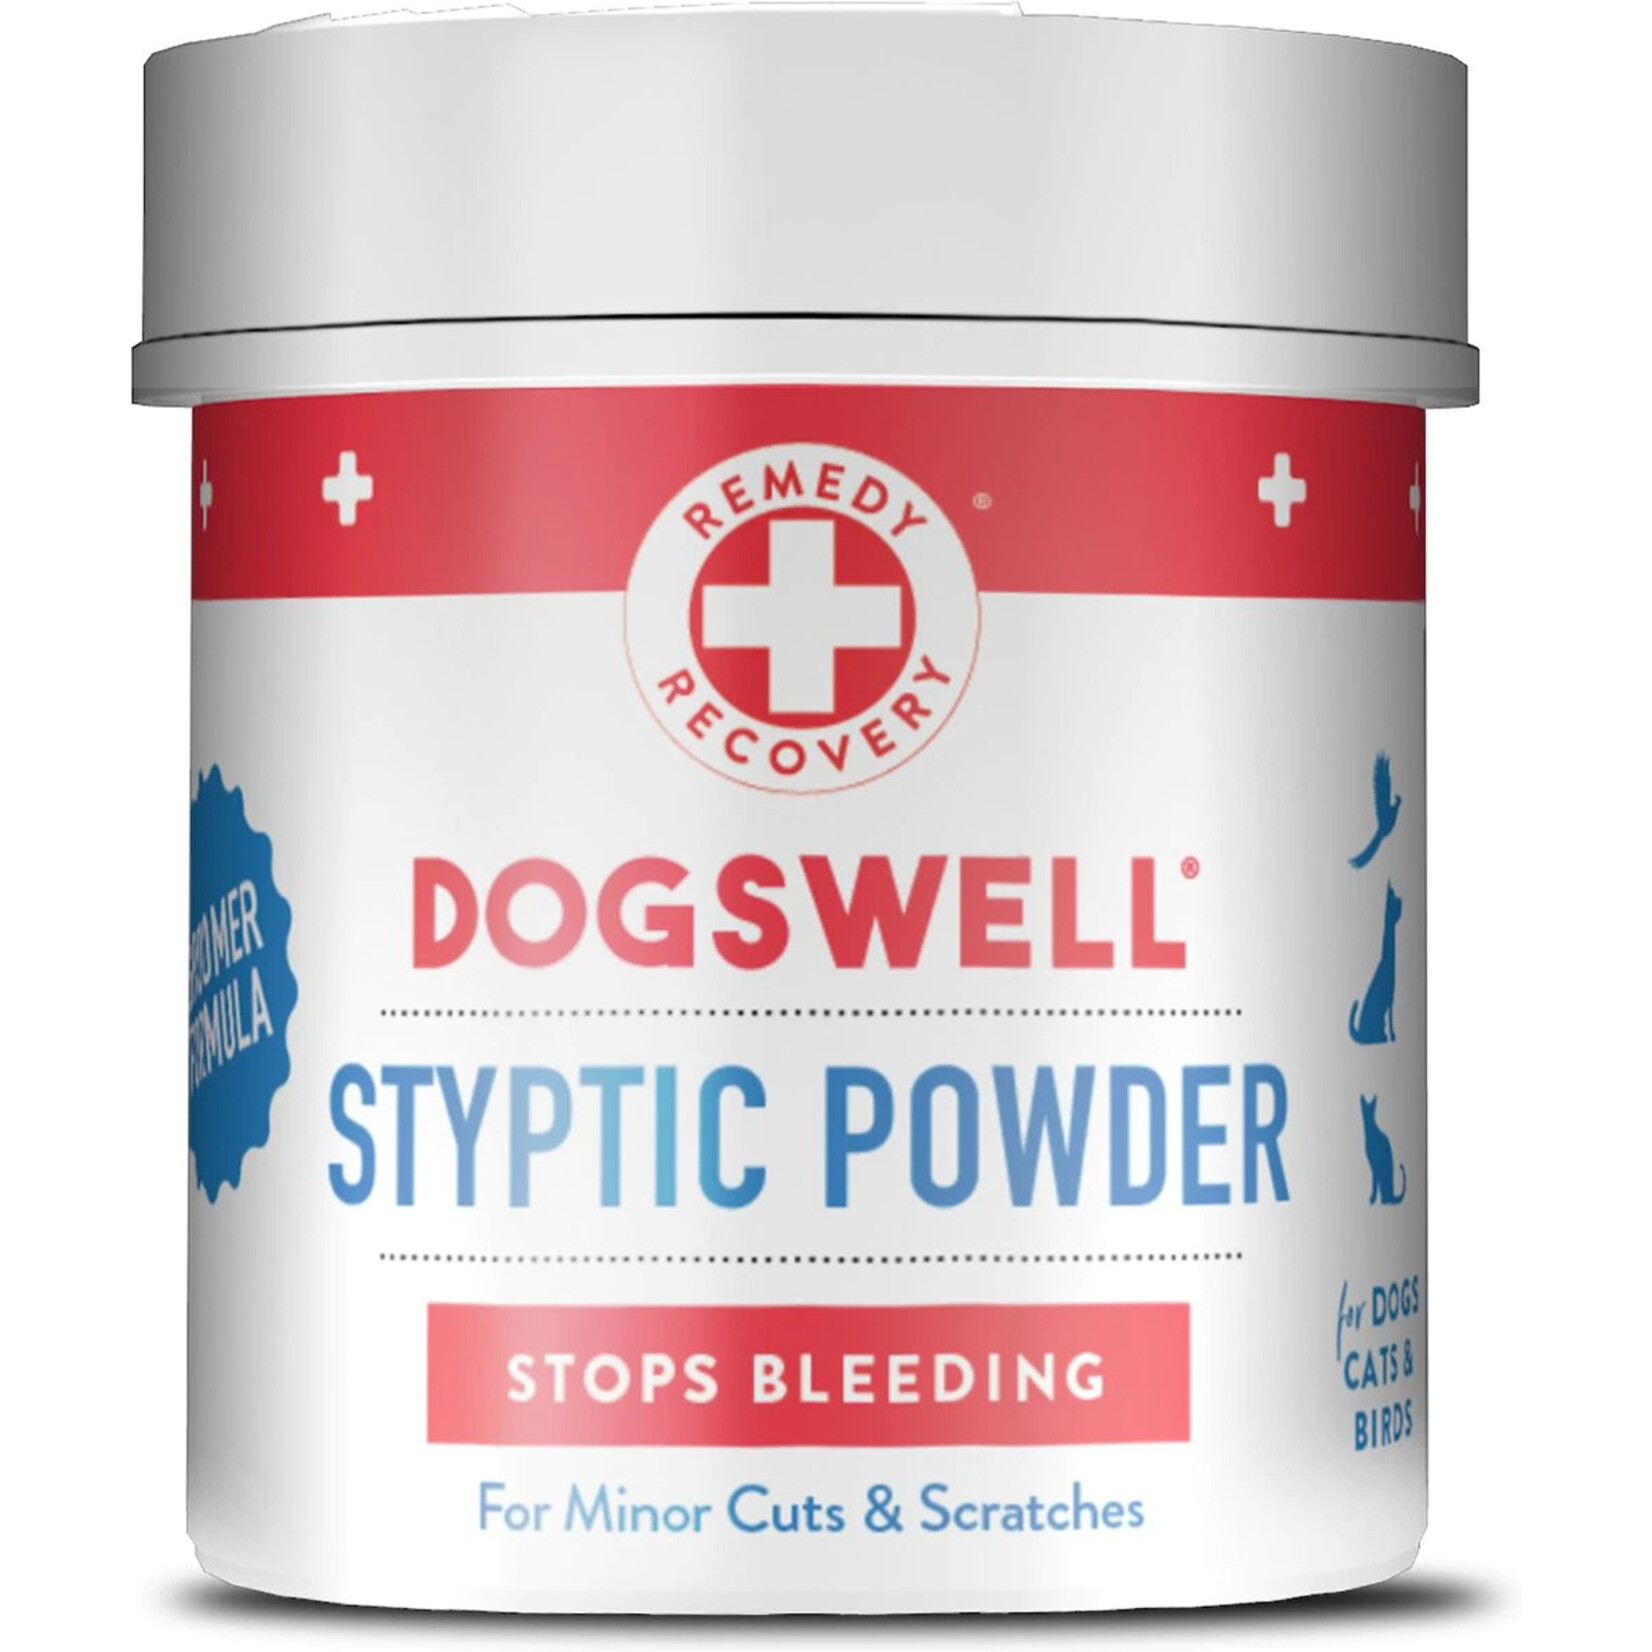 Dogswell Dogswell Remedy+Recovery Professional Groomer's Styptic Powder